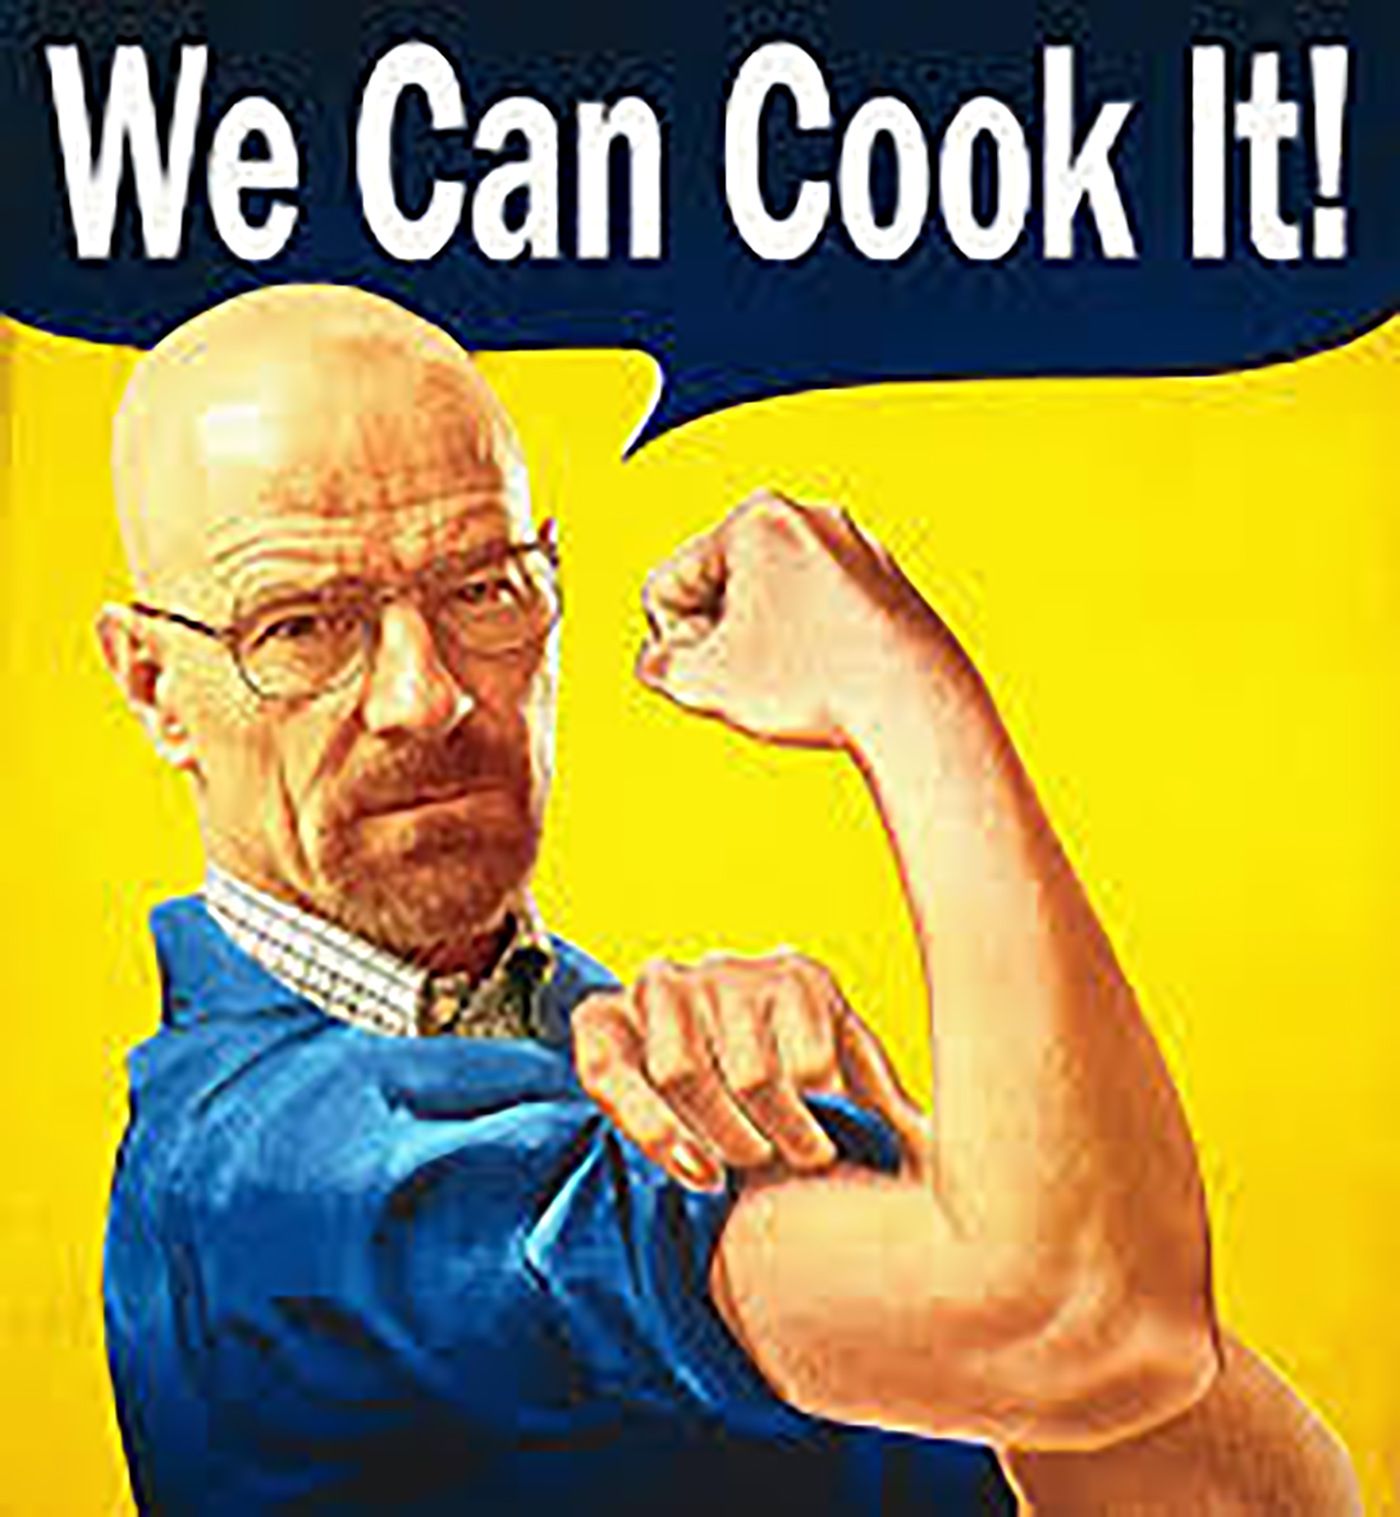 Walter White's head on Rosie the Riveter in a meme about Breaking Bad.